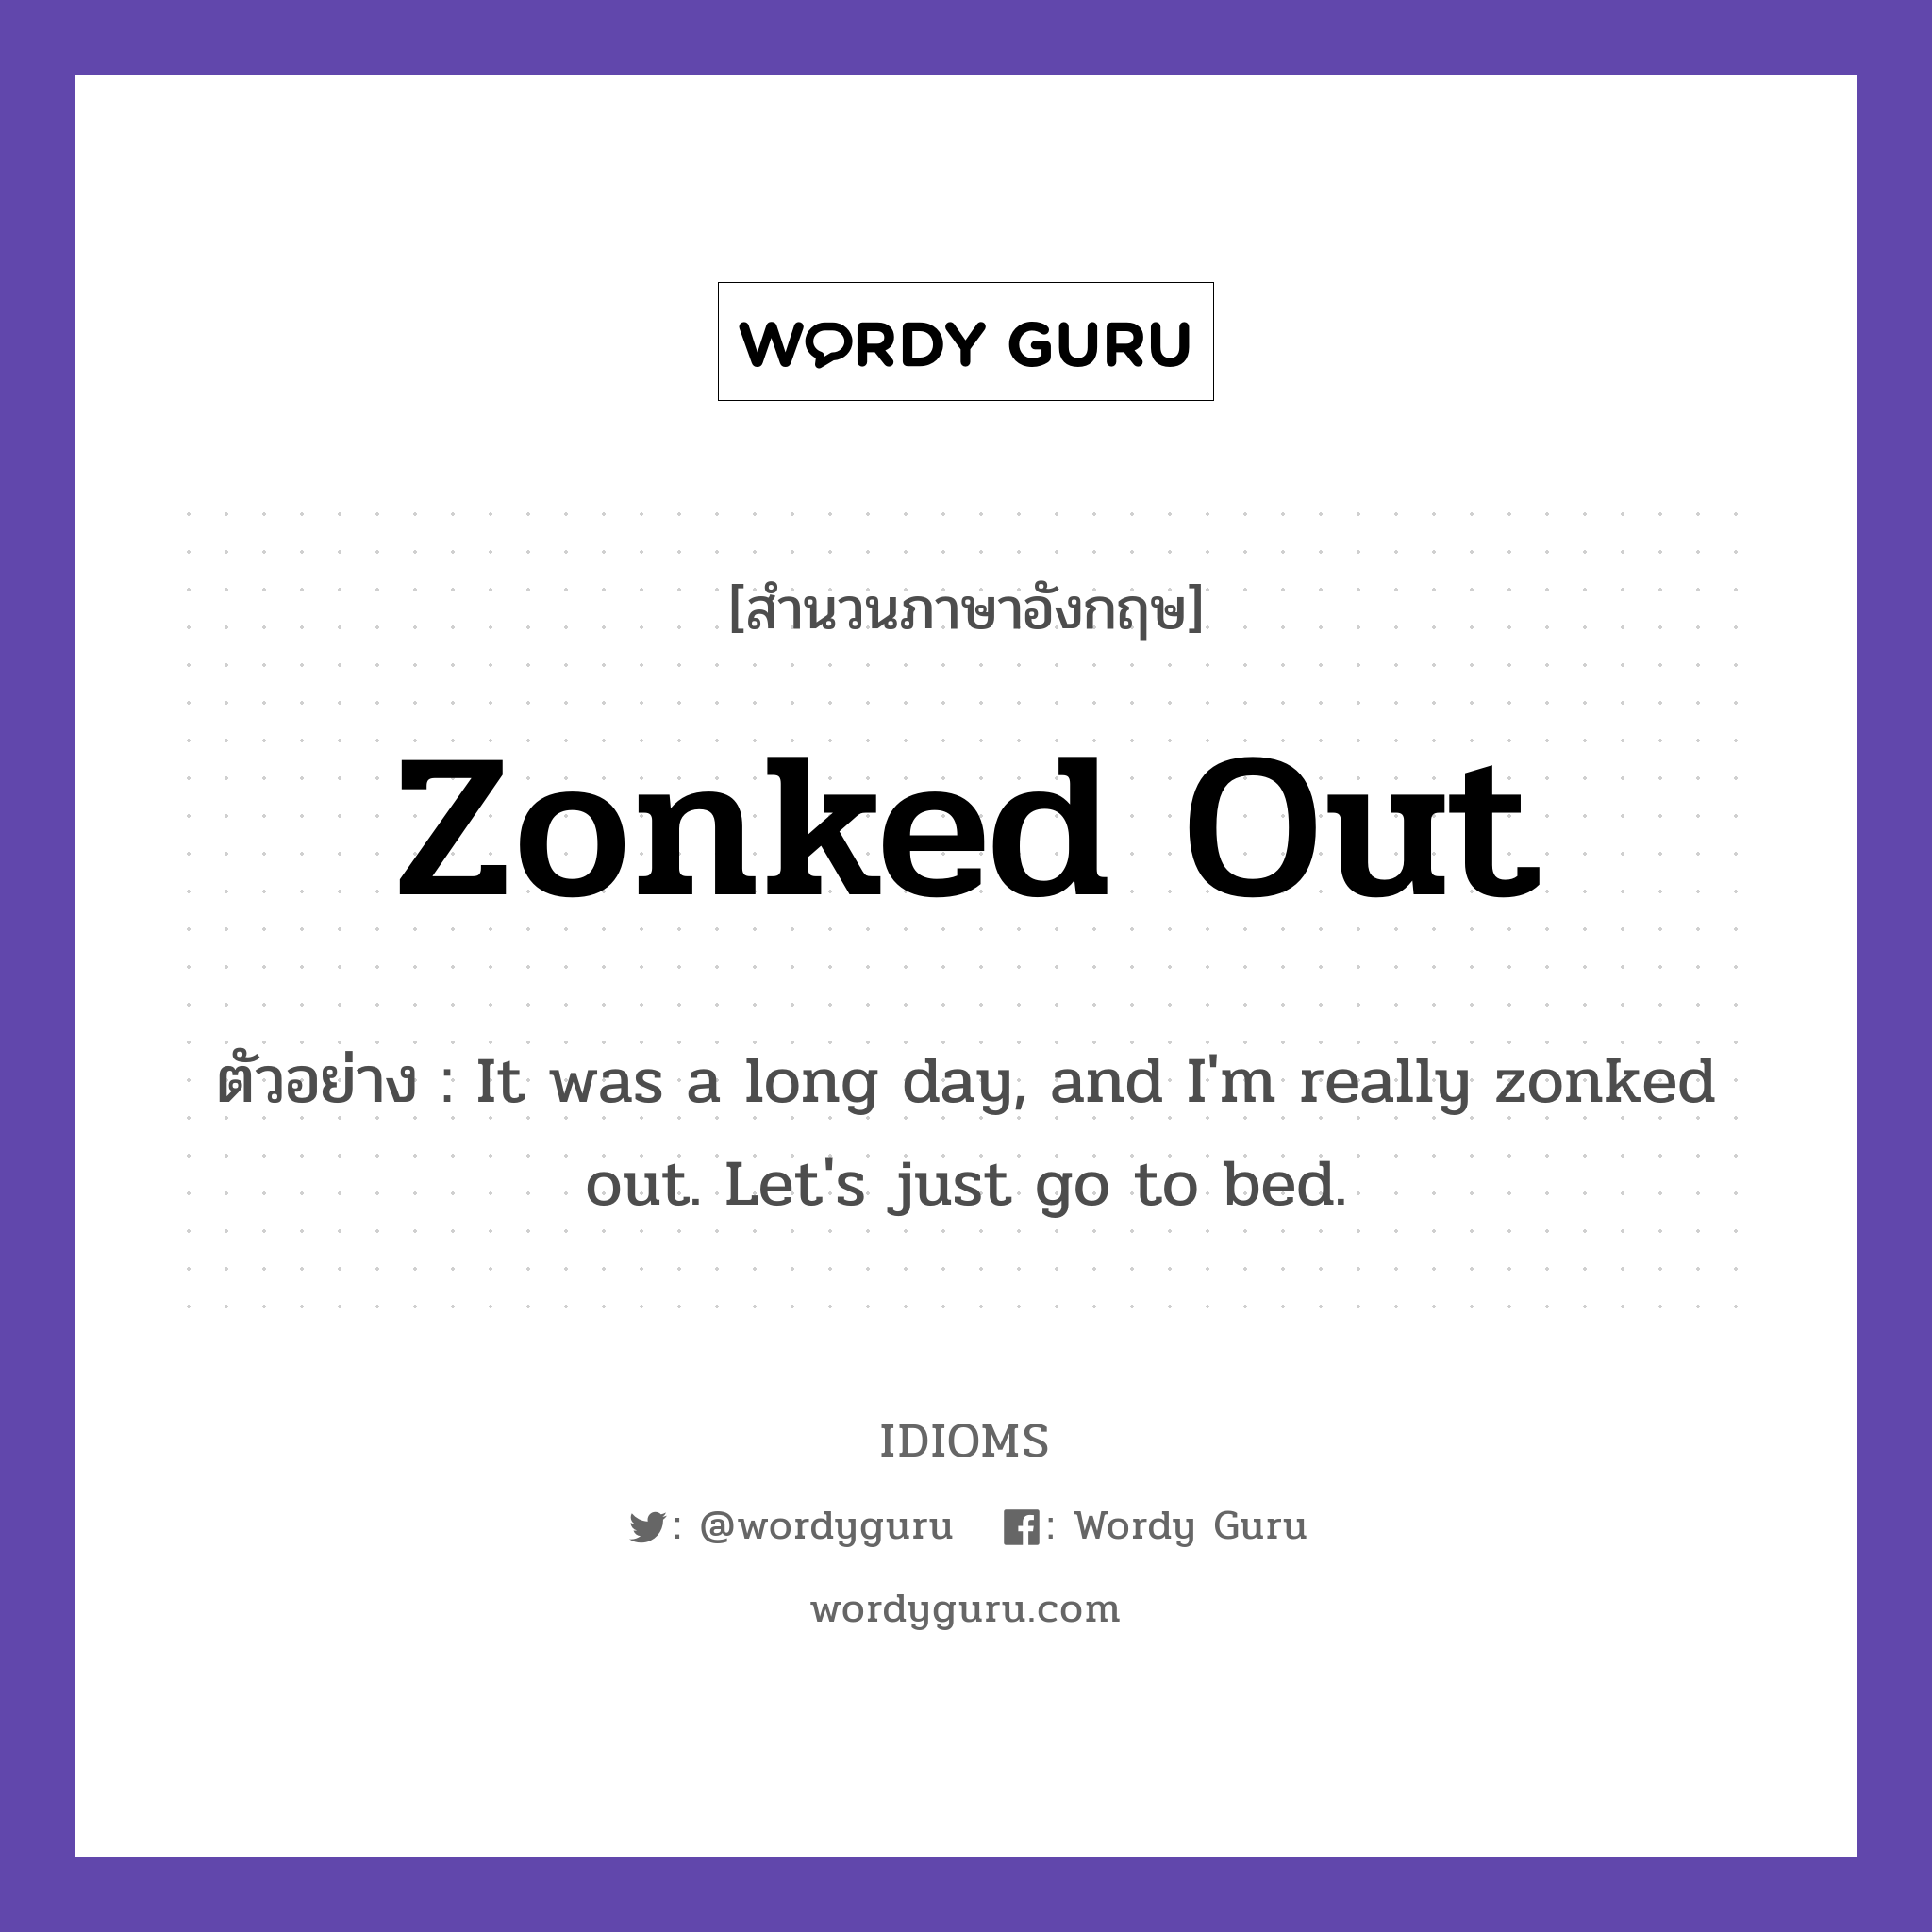 Zonked Out แปลว่า?, สำนวนภาษาอังกฤษ Zonked Out ตัวอย่าง It was a long day, and I'm really zonked out. Let's just go to bed.